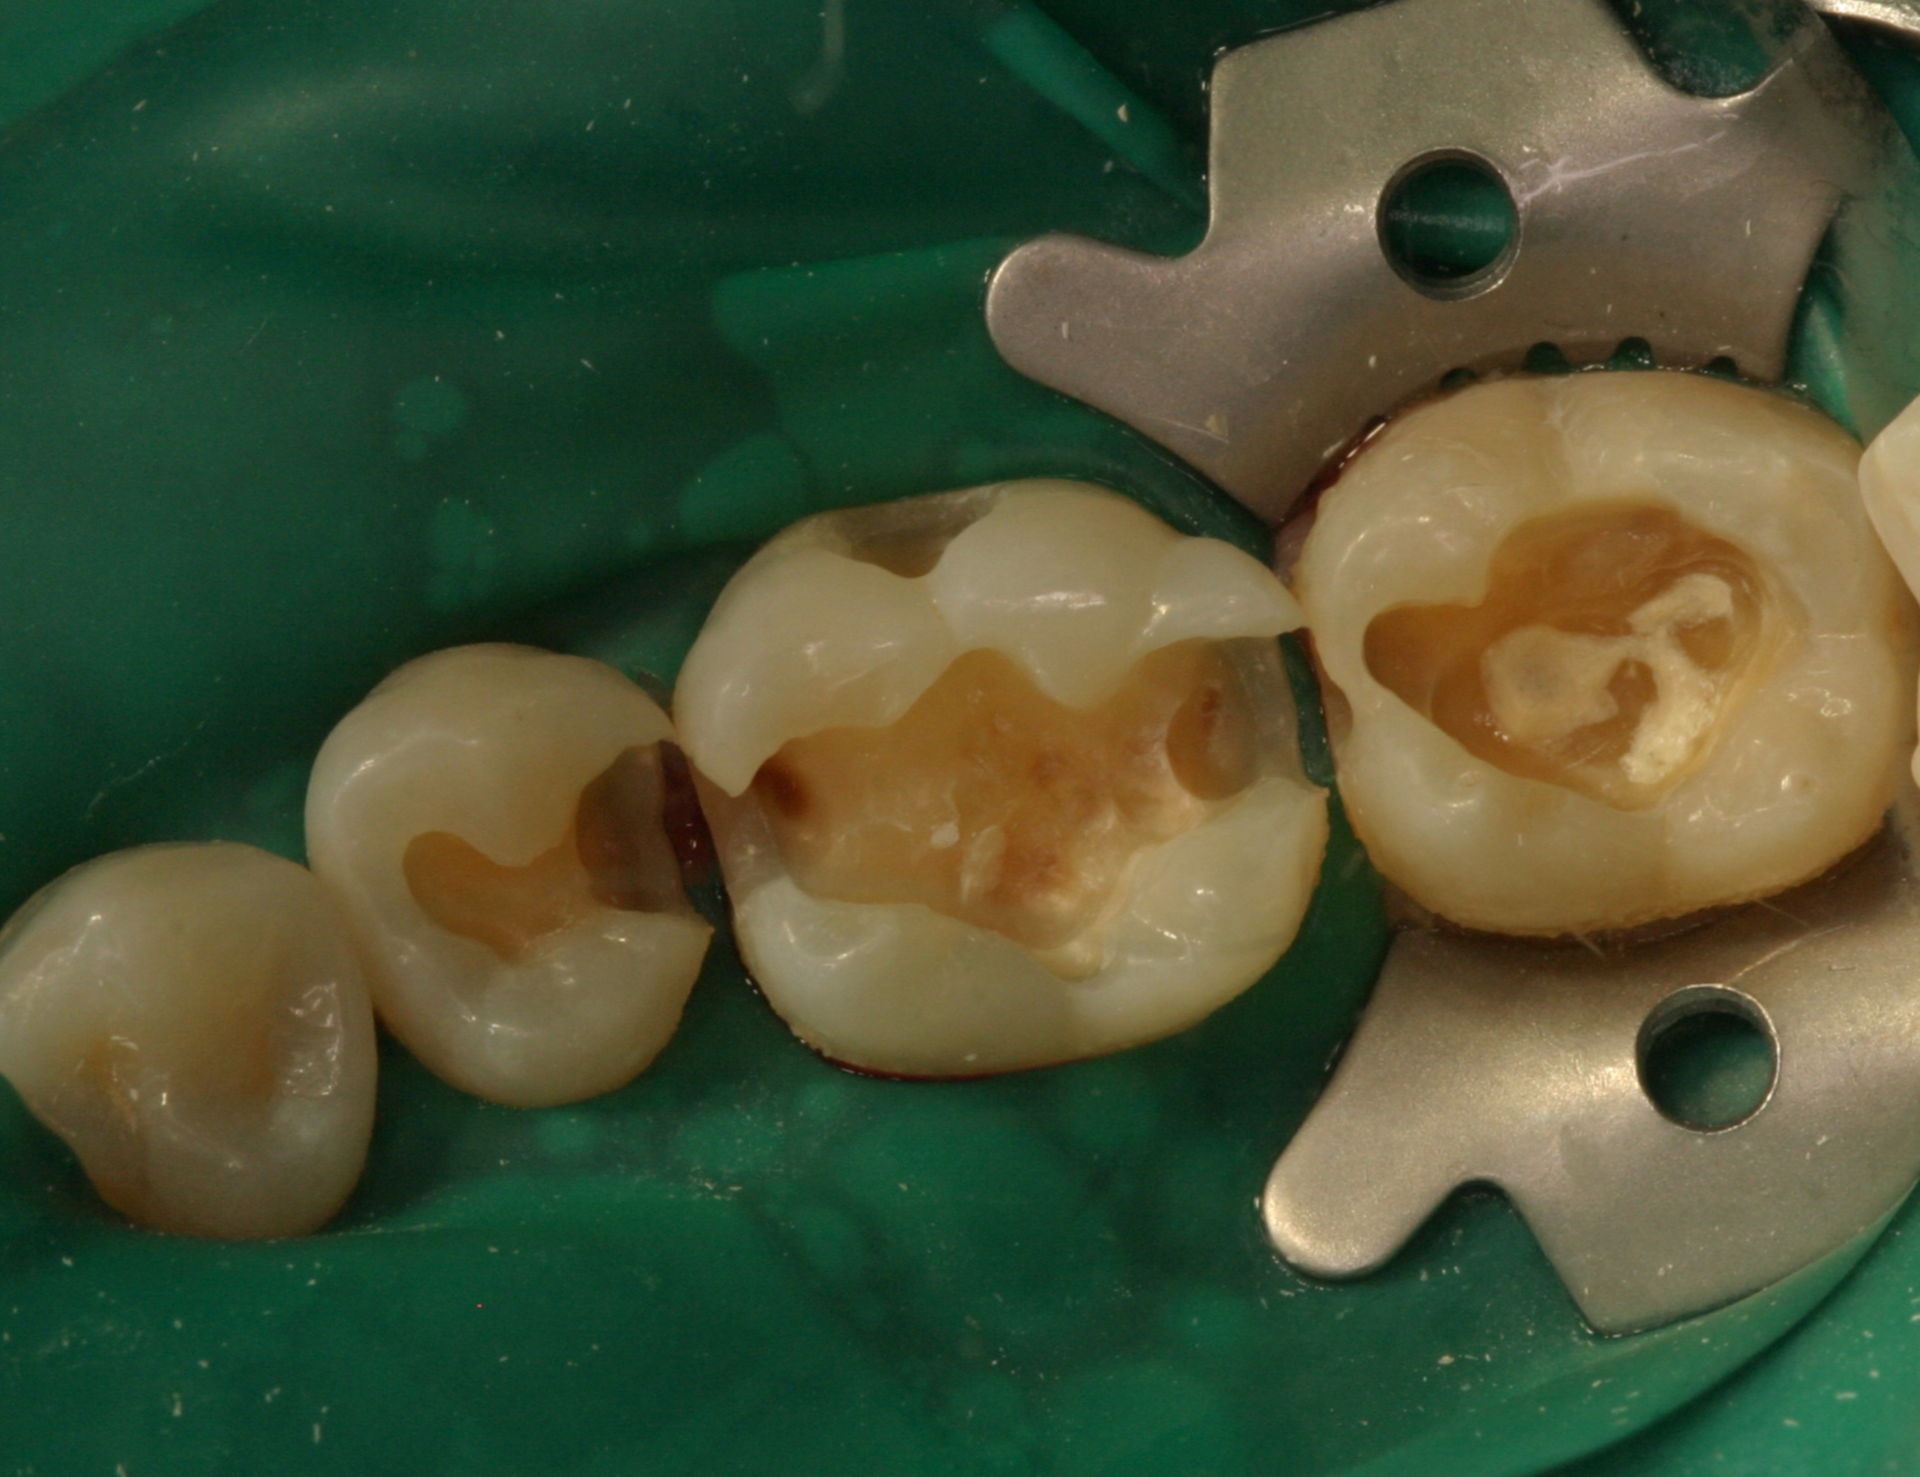 Teeth 45-47 after removal of the insufficient fillings, before excavation